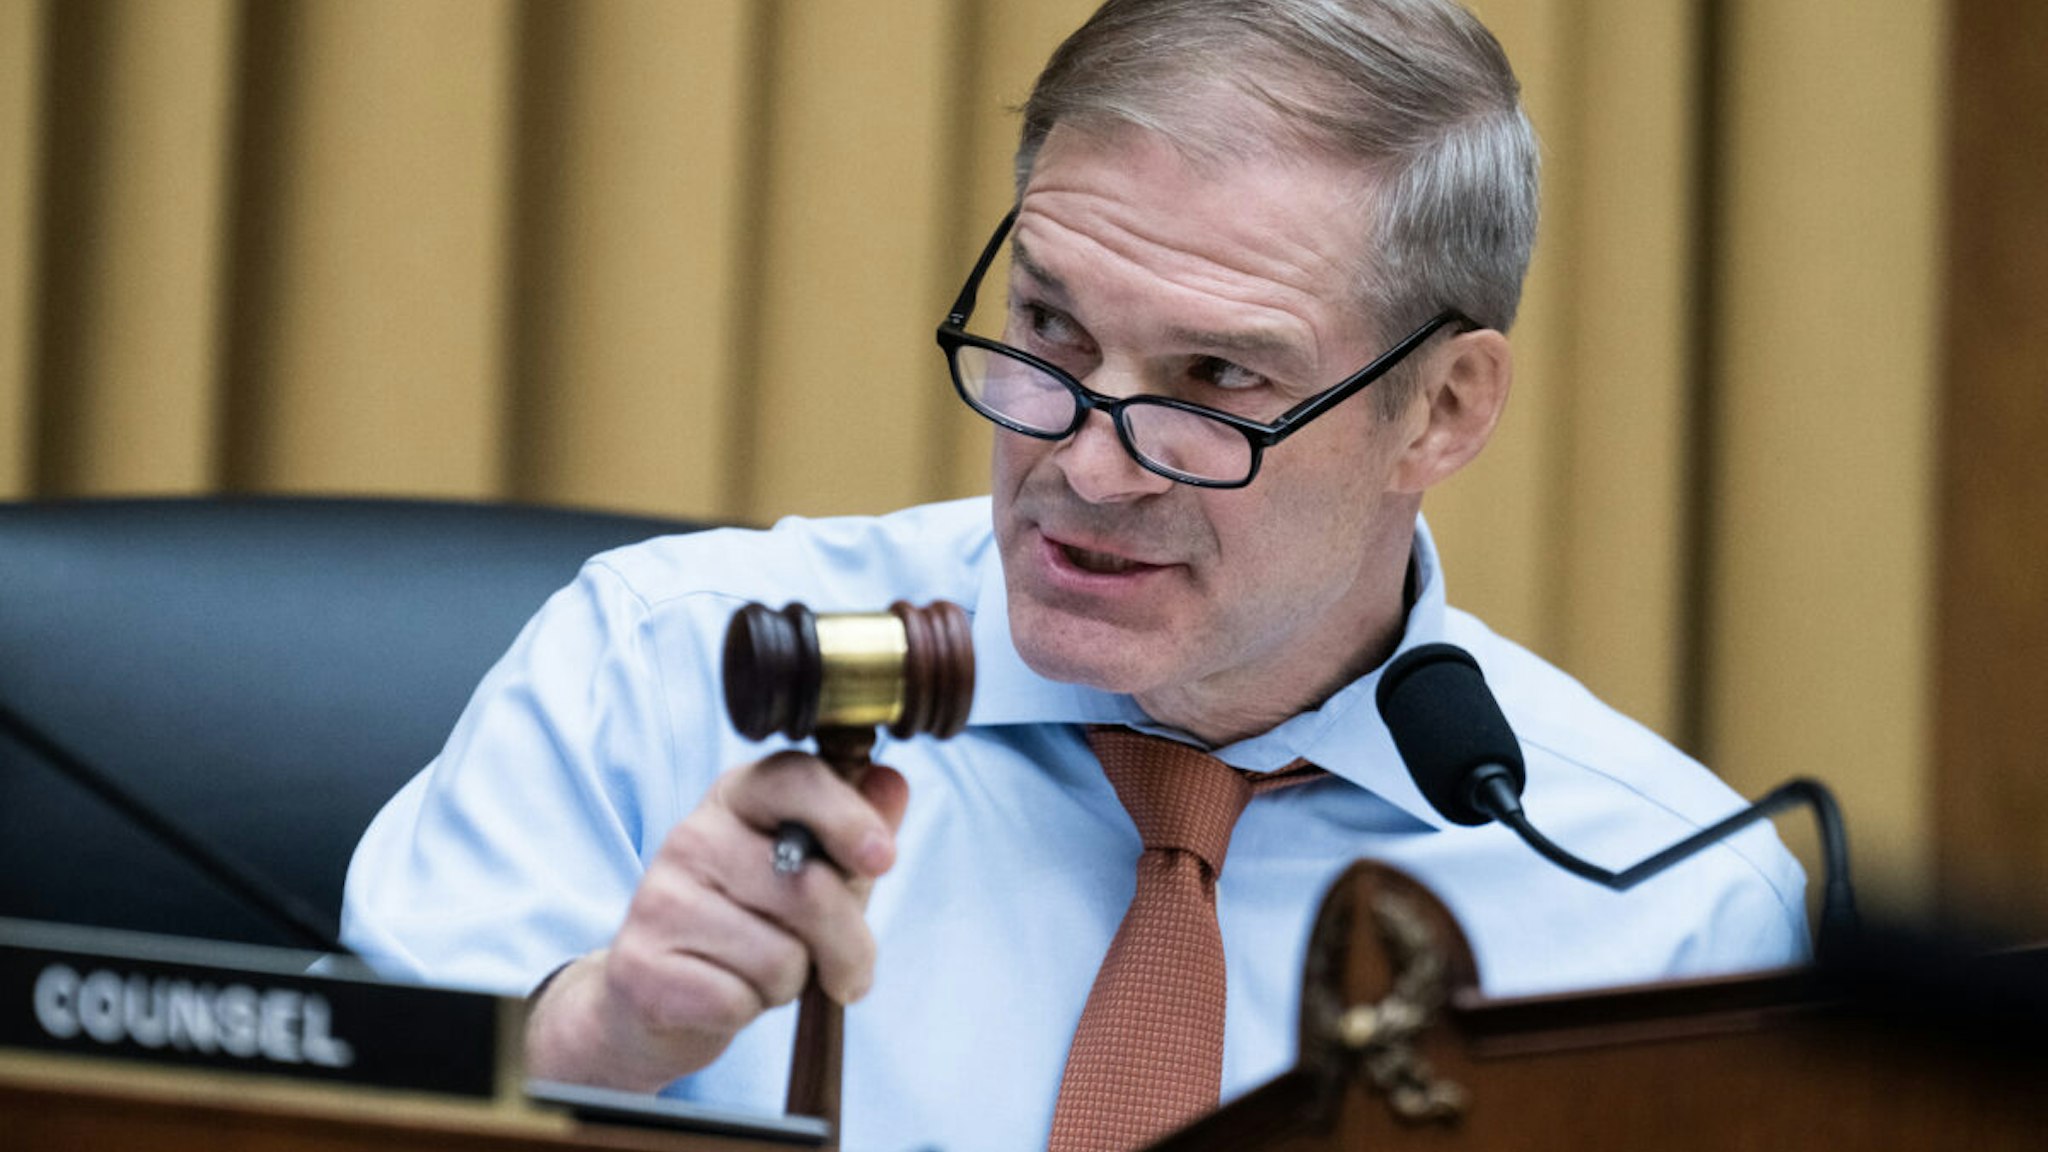 Chairman Jim Jordan, R-Ohio, conducts the House Judiciary Committee hearing titled "Oversight of the Bureau of Alcohol, Tobacco, Firearms and Explosives," in Rayburn Building on Wednesday, April 26, 2023. ATF Director Steven Dettelbach testified.